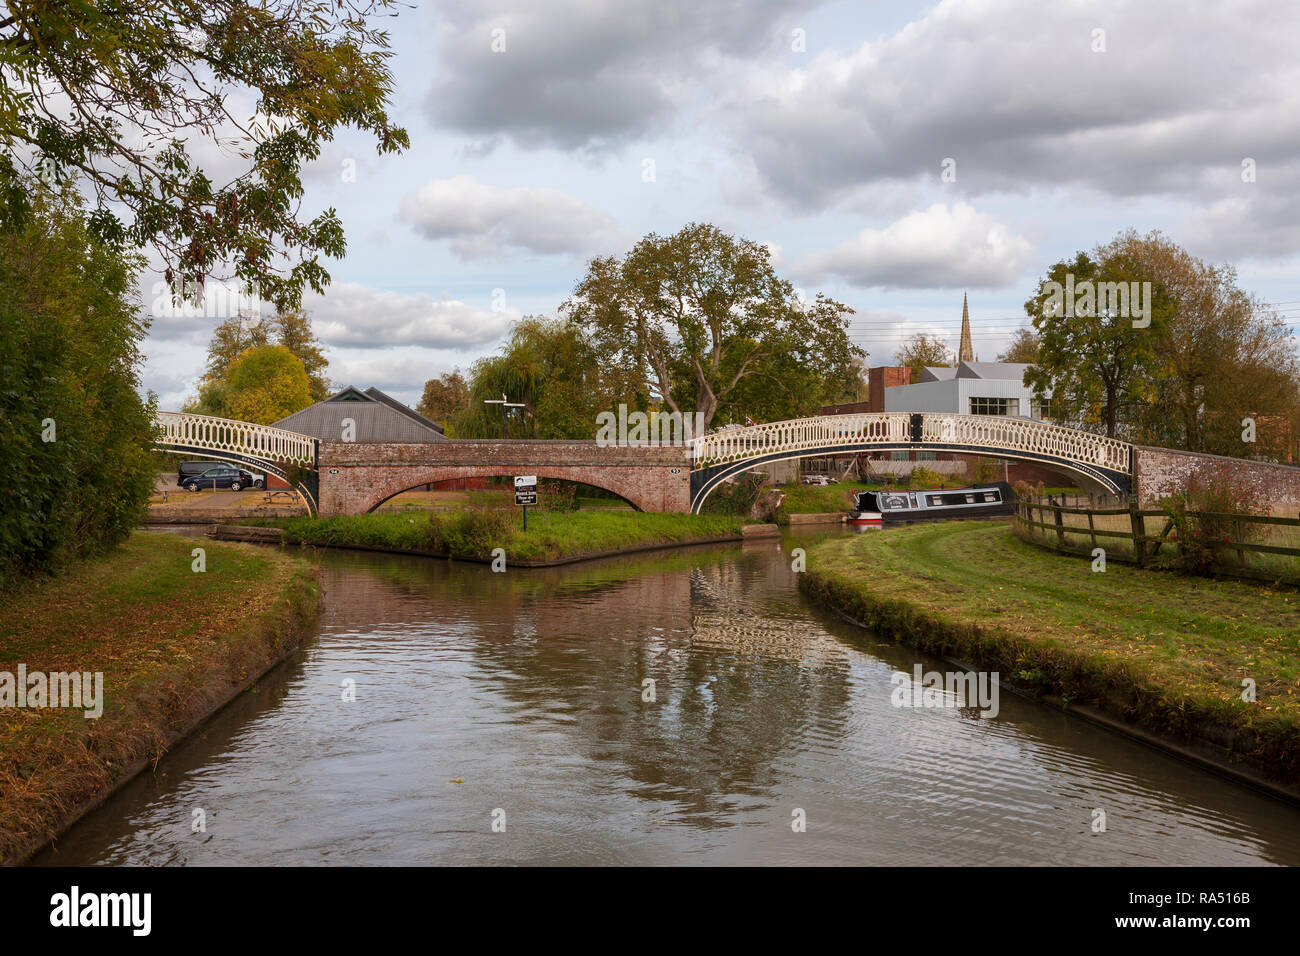 The twin bridges at Braunston Turn, Braunston, Northamptonshire, England, UK, where the Grand Union and Oxford canals join Stock Photo